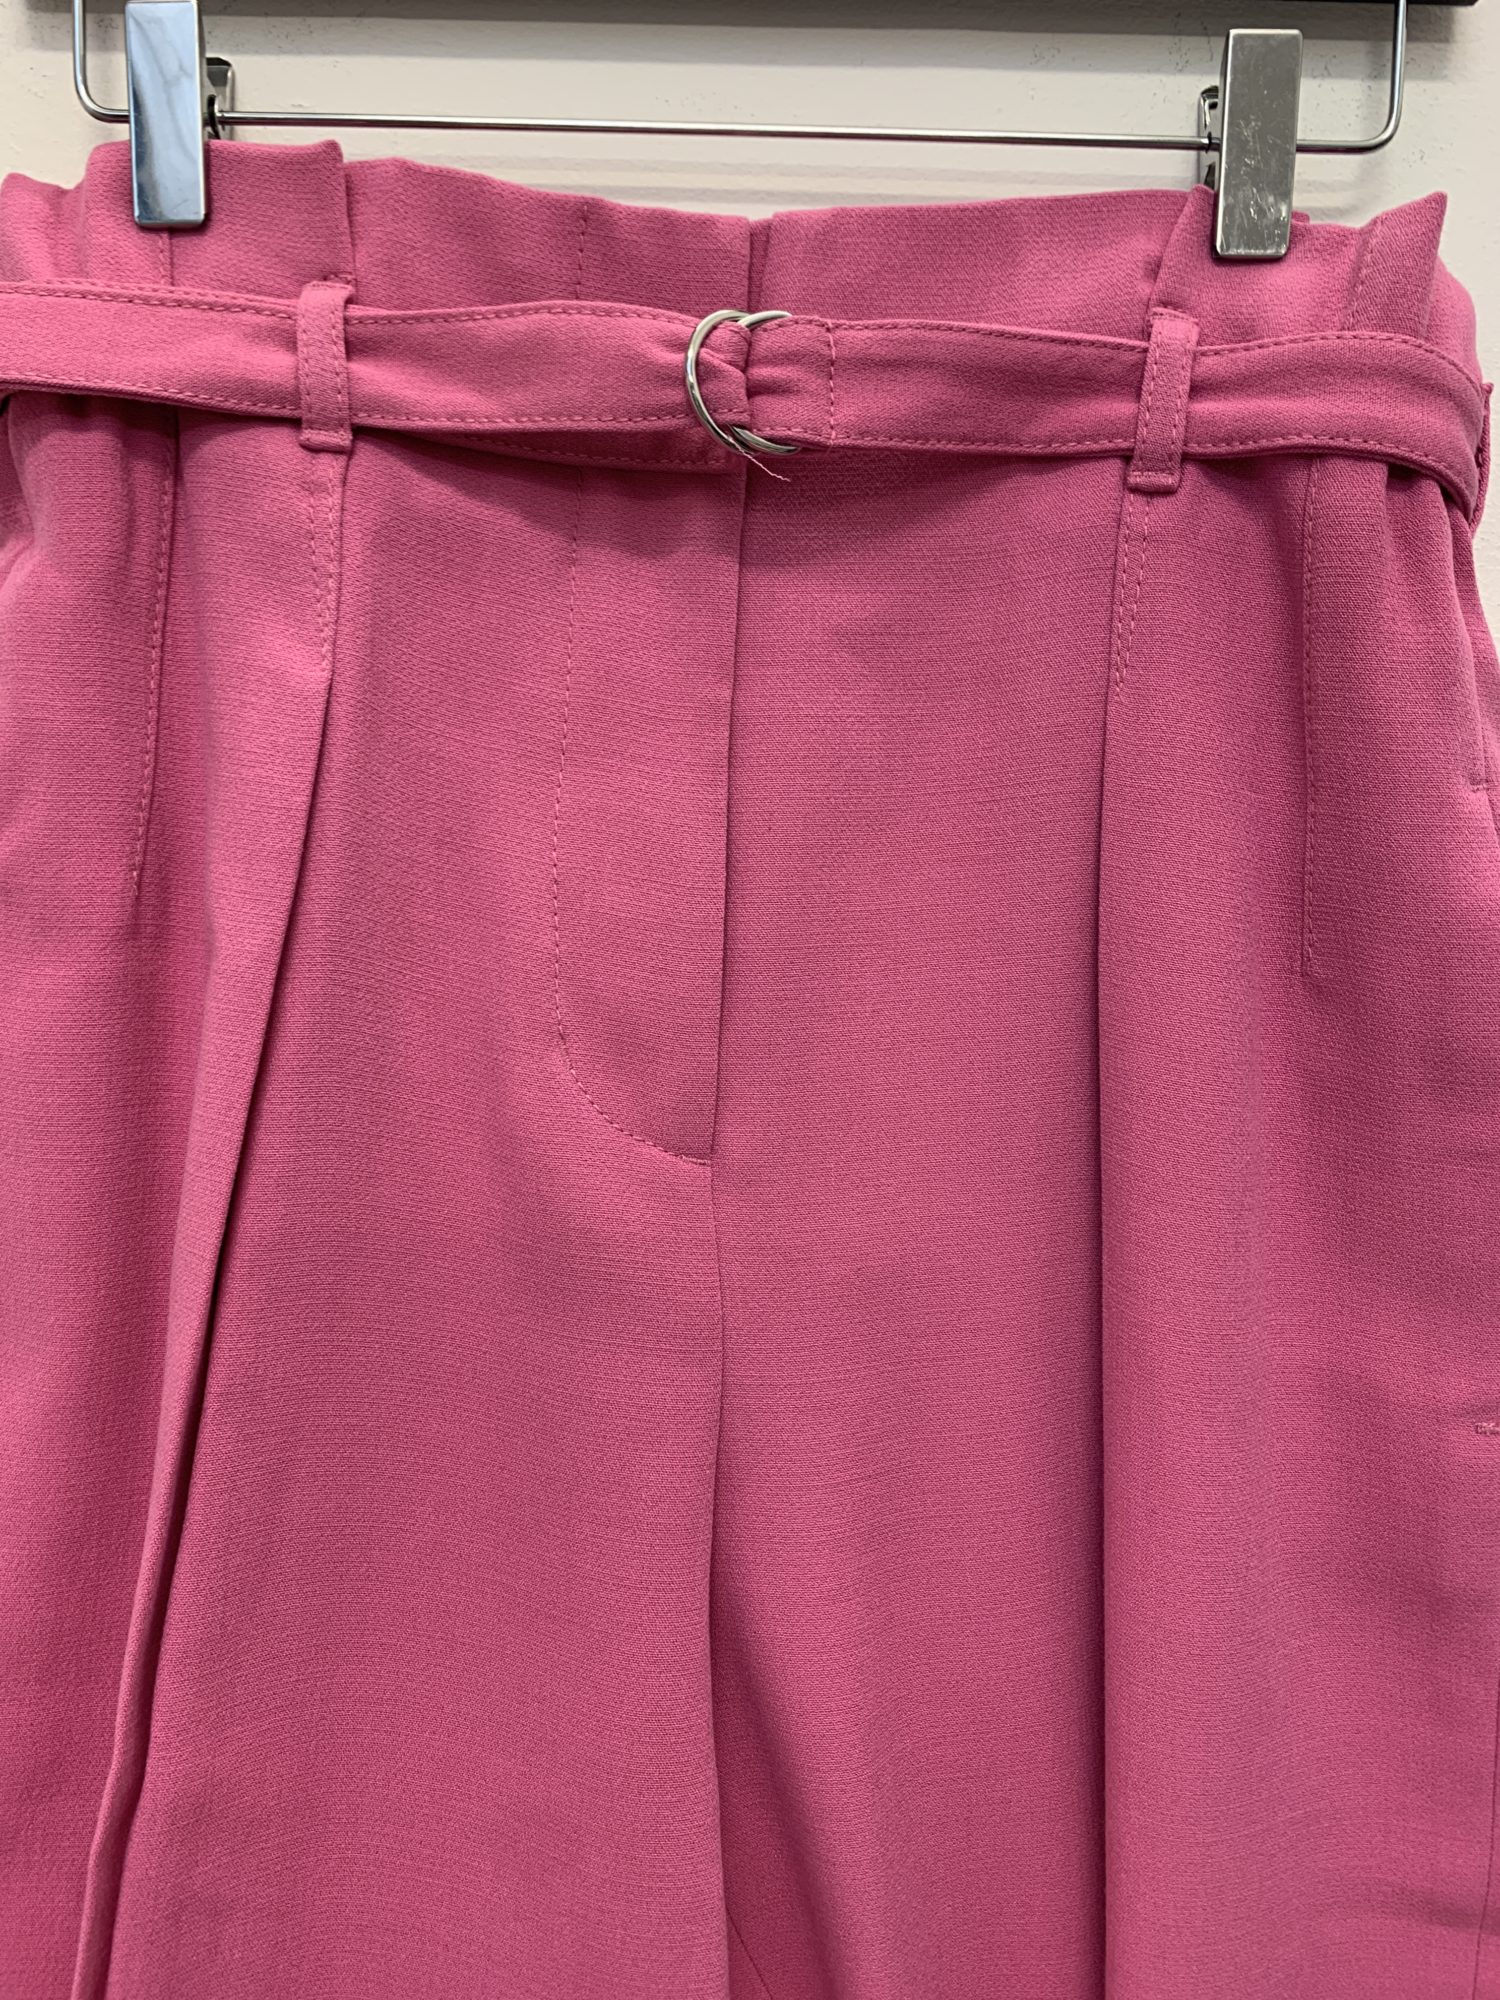 Phillip Lim belted pink trousers – StyleSwap